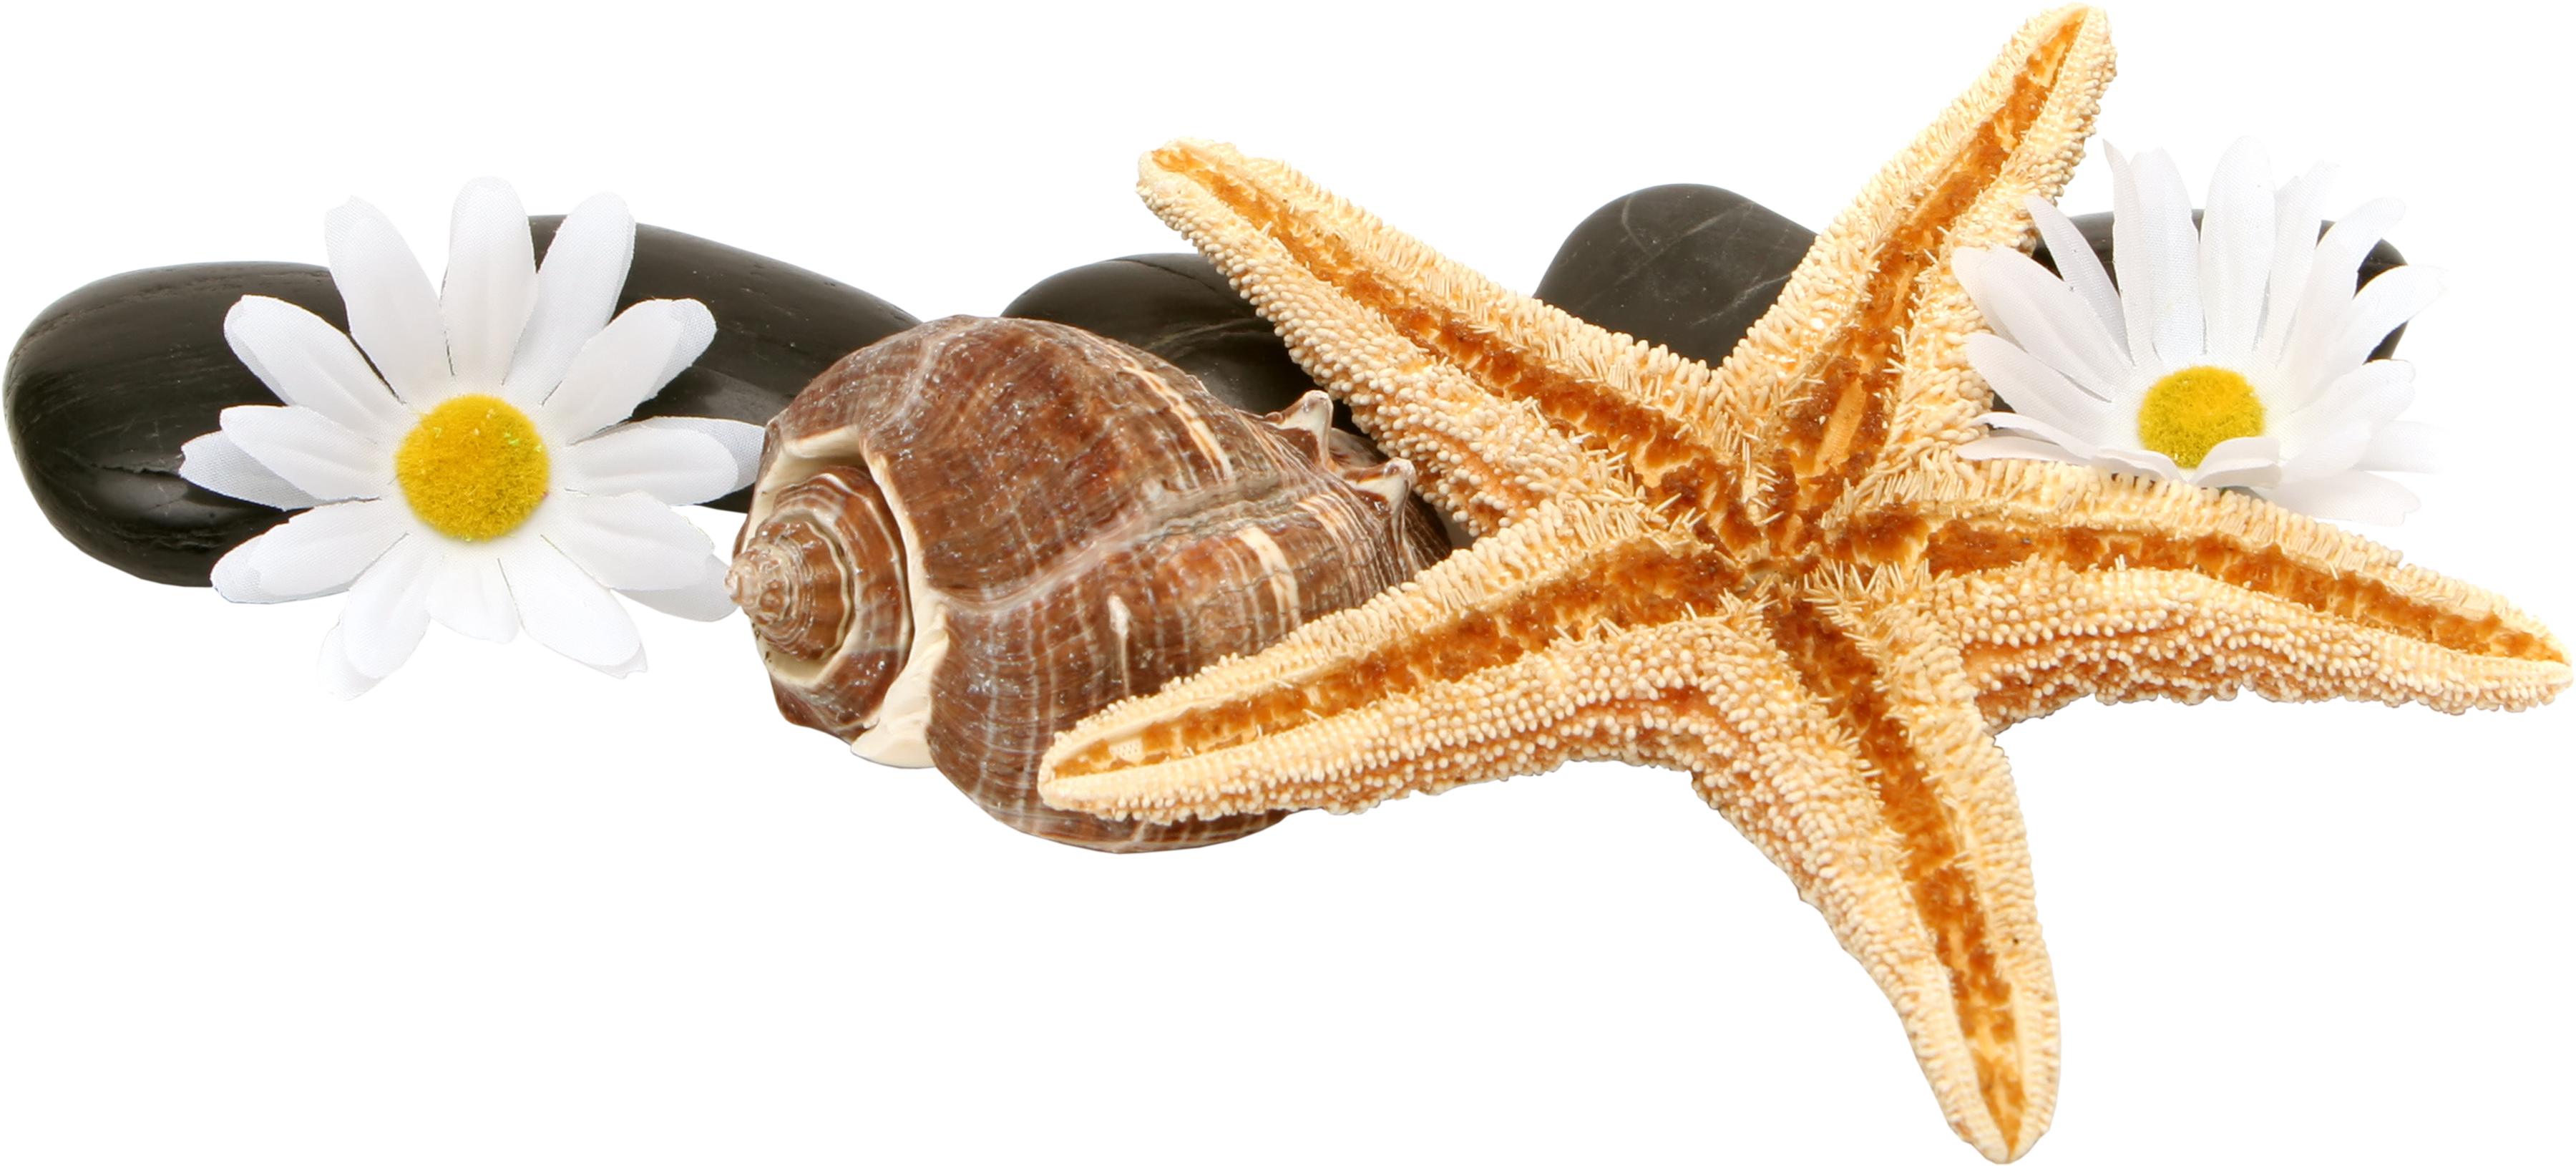 starfish png images collected for download crazypngm crazy png images download 28596